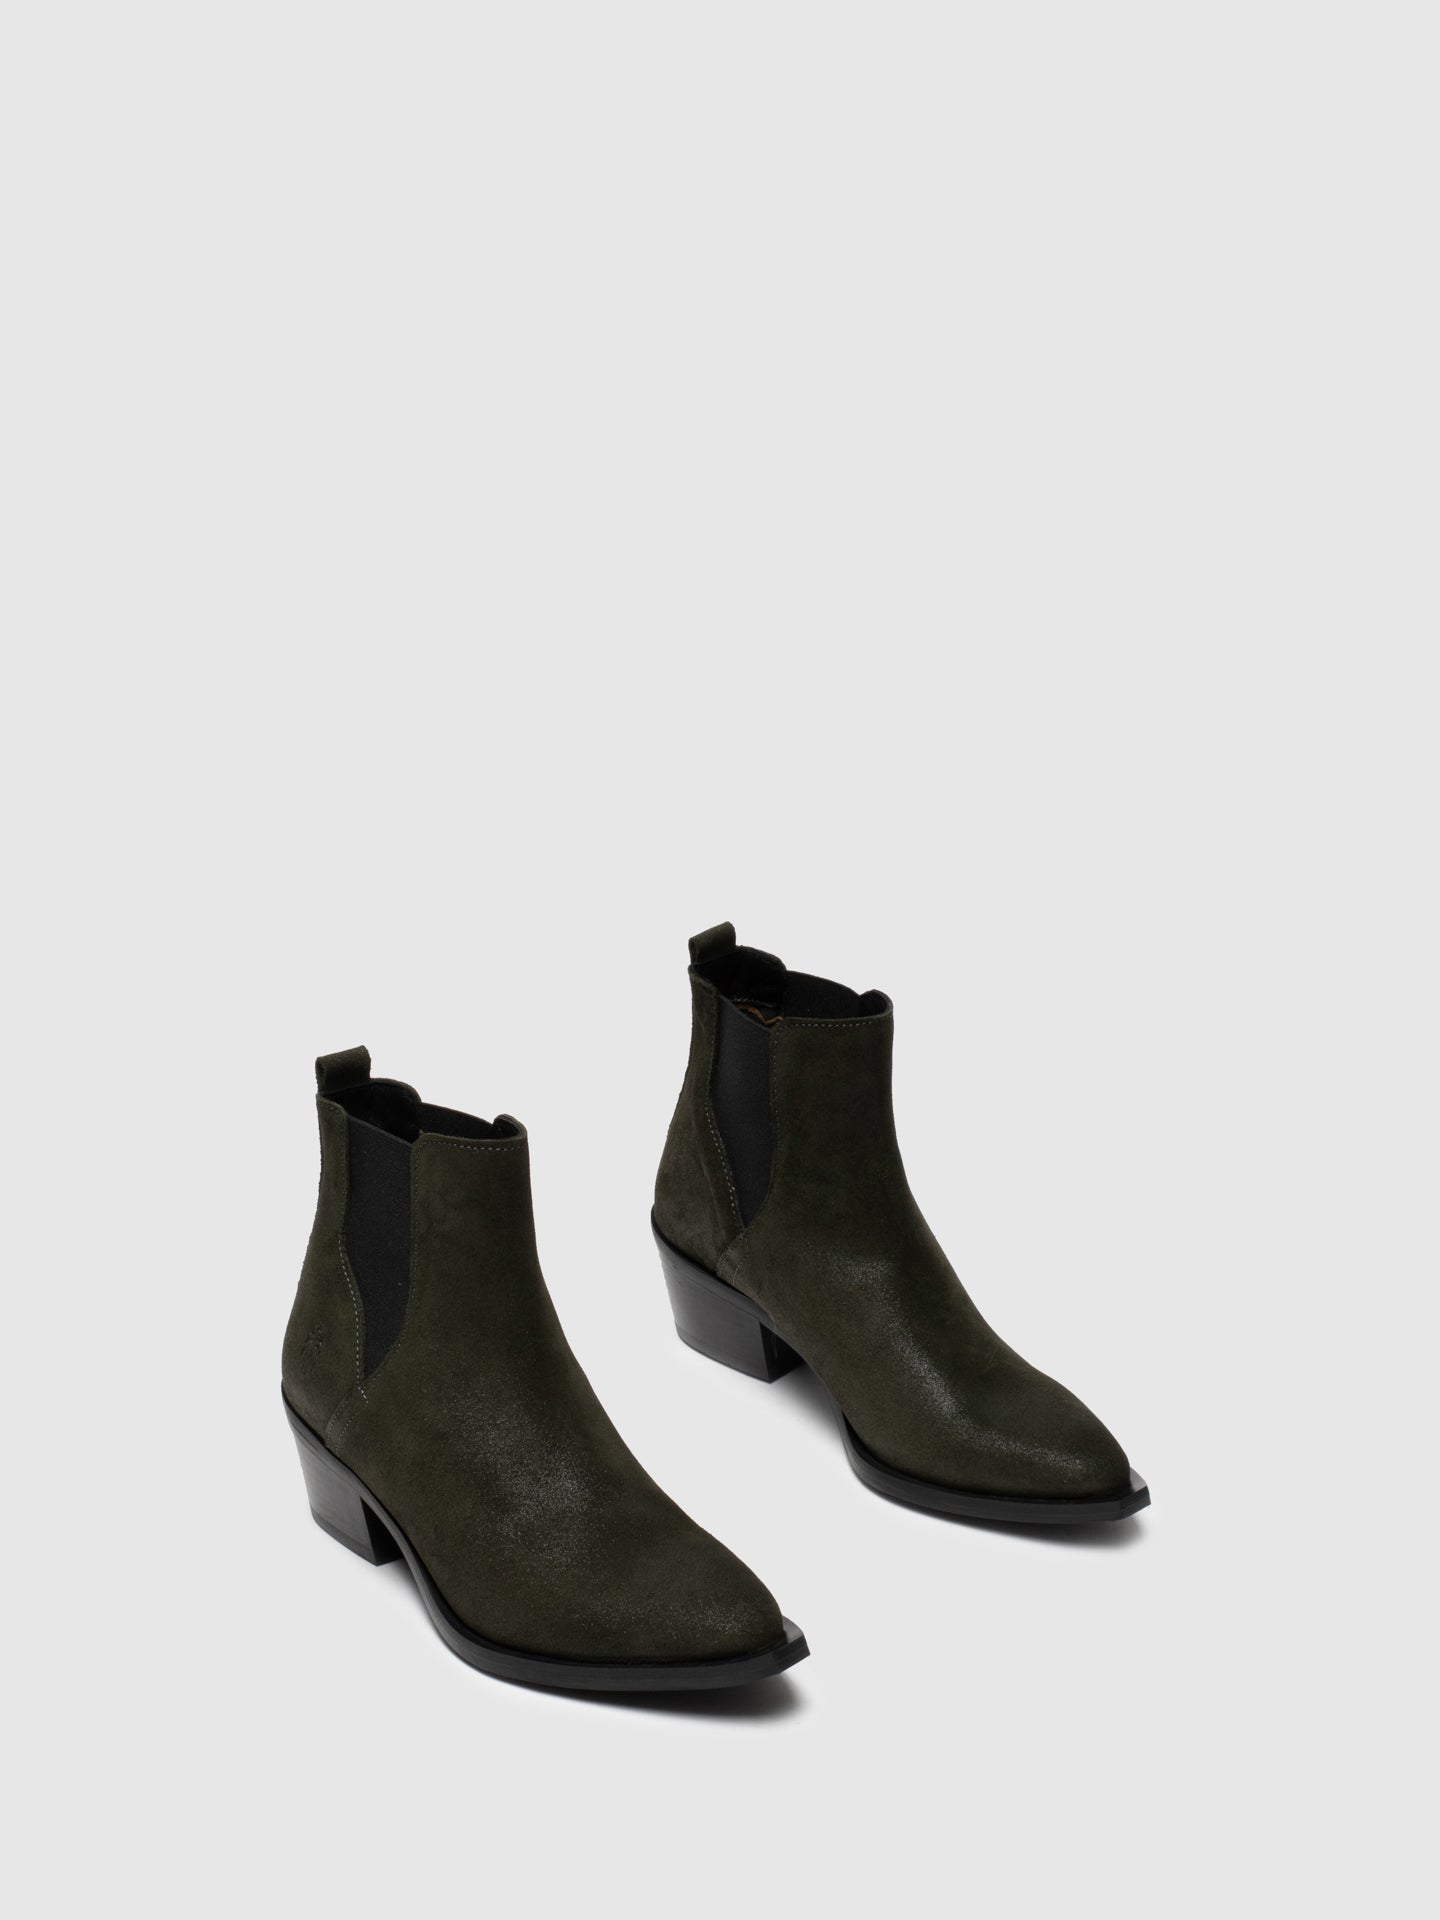 Fly-London-Green-Ankle-Boots-FLYP144496003_2_2000x.jpg?v=1571712624